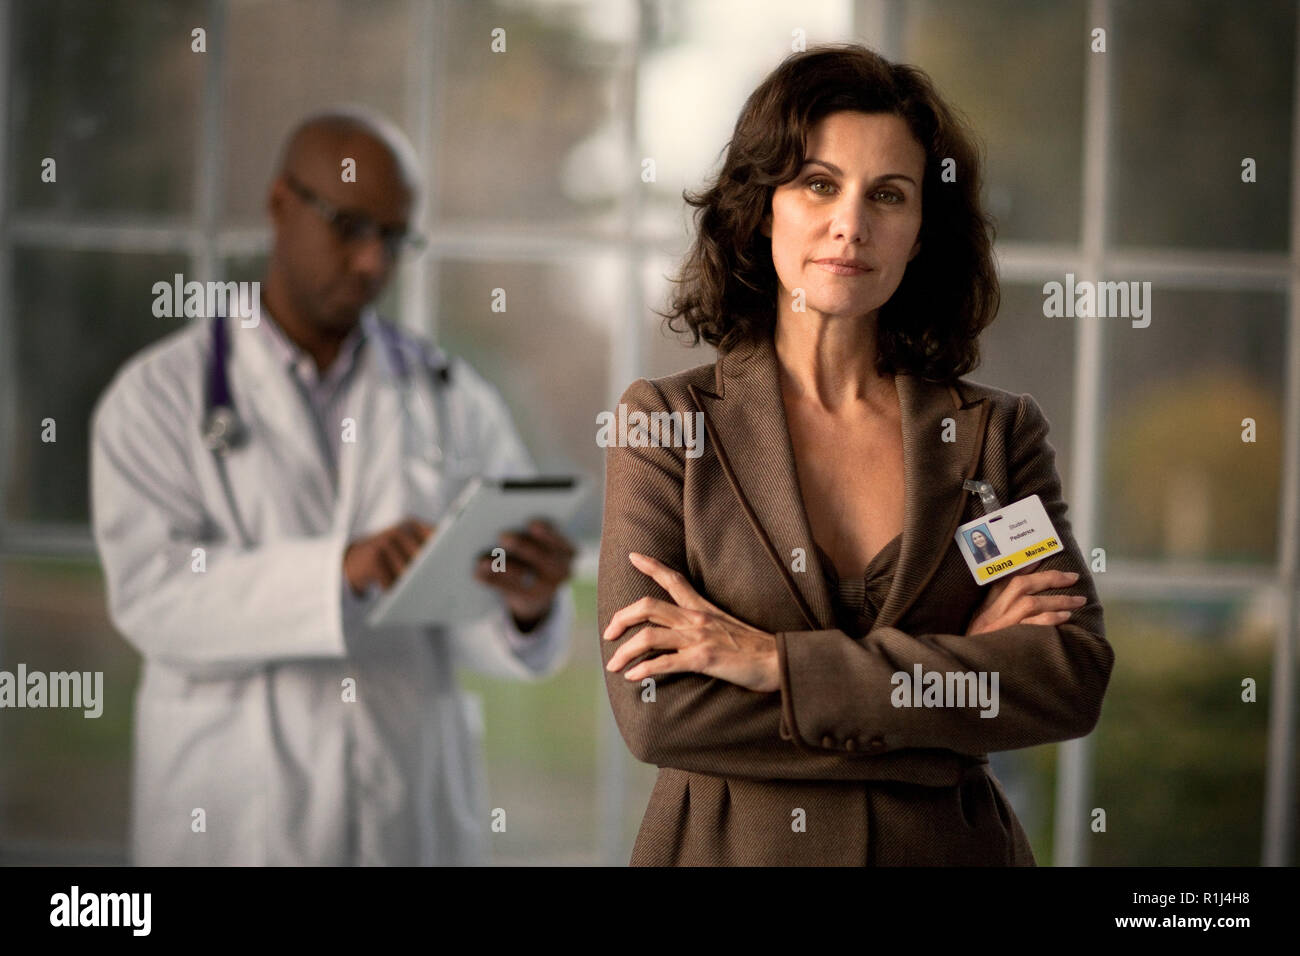 Portrait of a mid-adult female doctor. Stock Photo